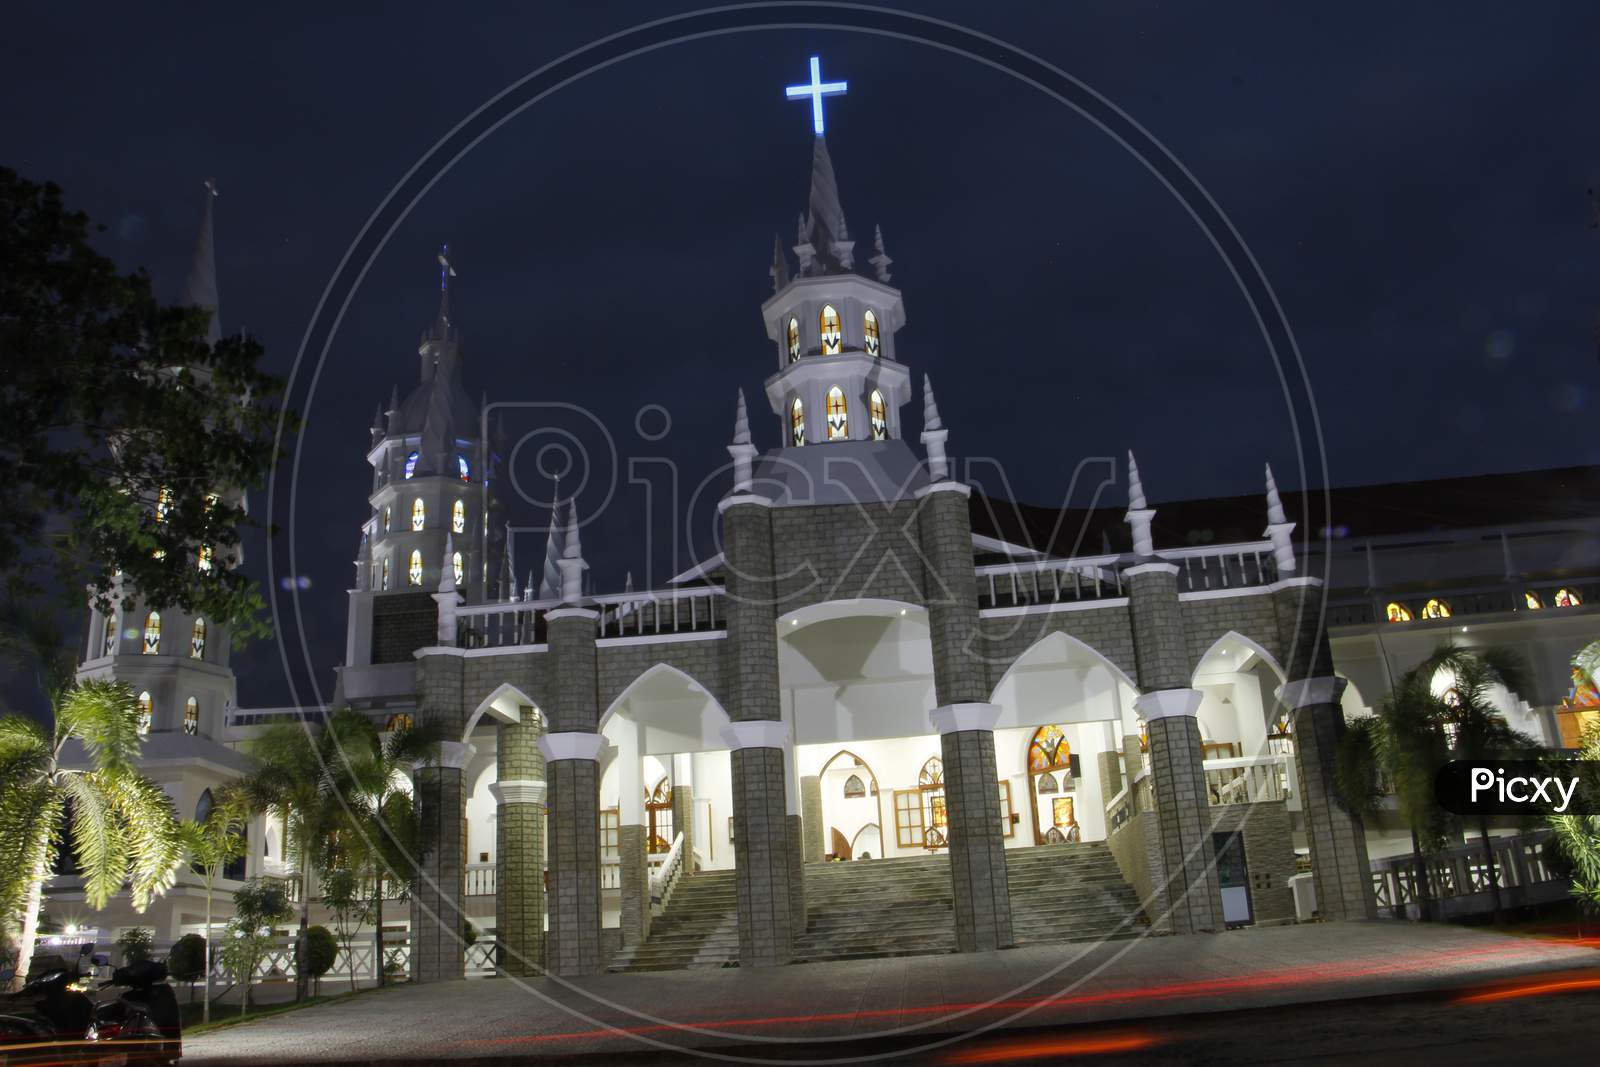 Basilica of the Sacred Heart of Jesus church architecture